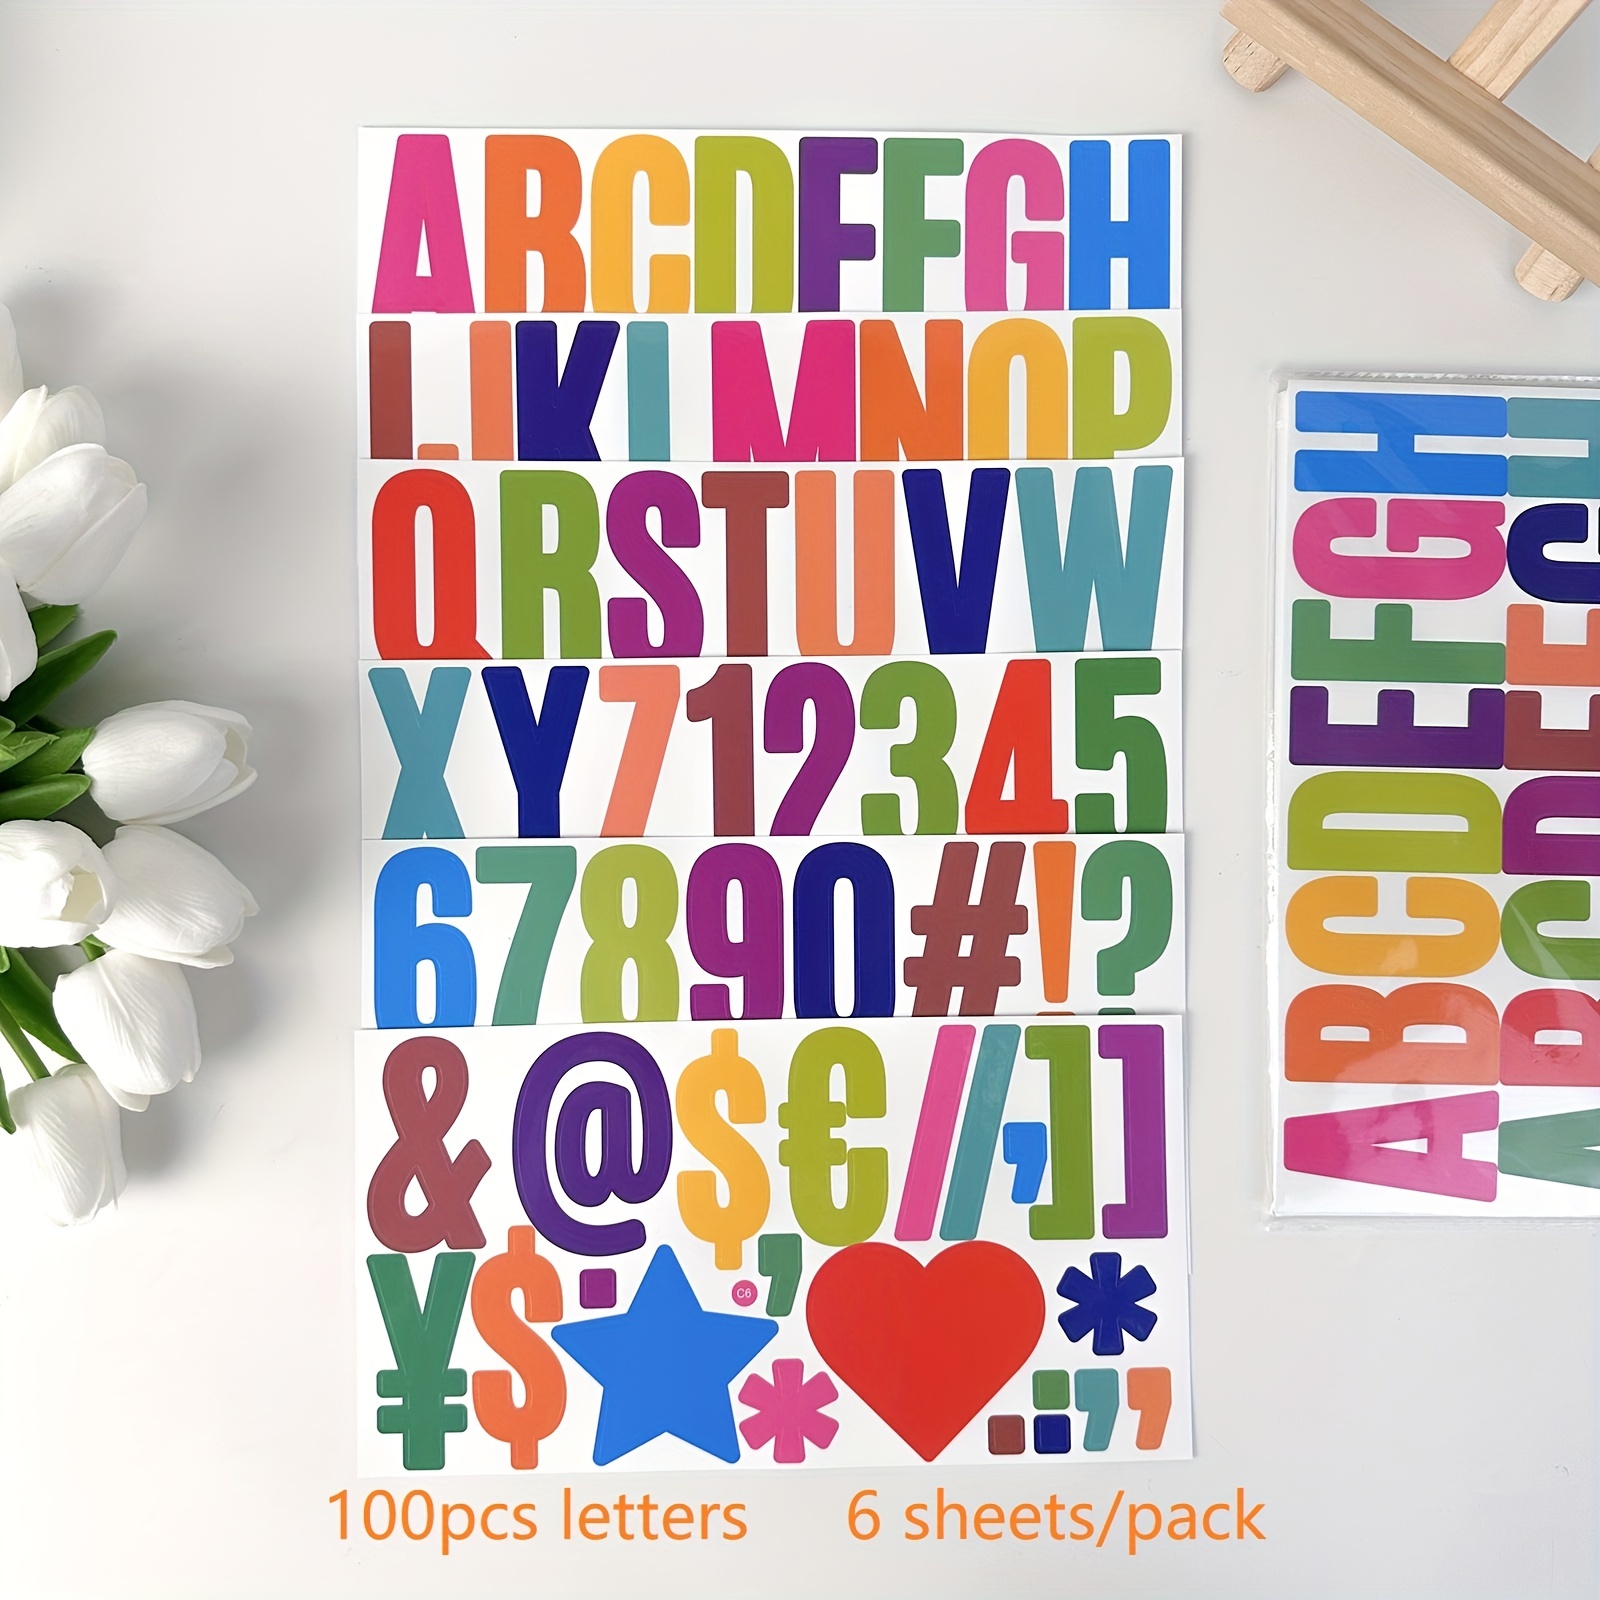 24 Sheets Alphabet Stickers, Letter Stickers 2 inch and 3 Inch, Vinyl  Letter Stickers, Waterproof Letter Stickers for Water Bottle, Stick on  Letters